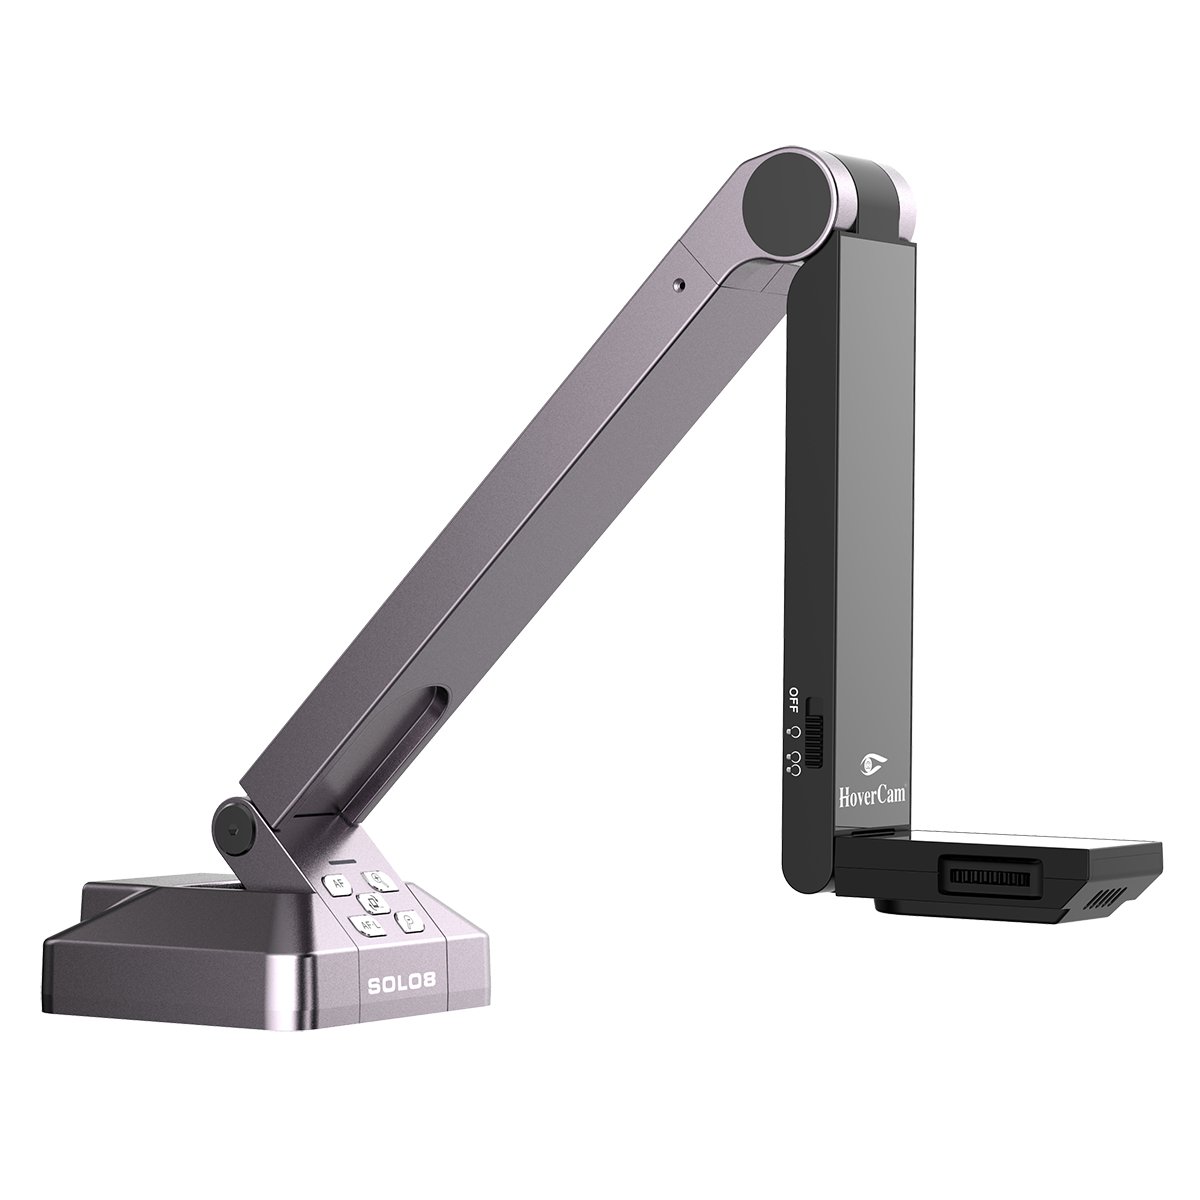 Used Hovercam Solo 8 Document Camera 8.0 MegaPixel Resolution, 30 Frames/Sec Speed Over USB @ 1080p